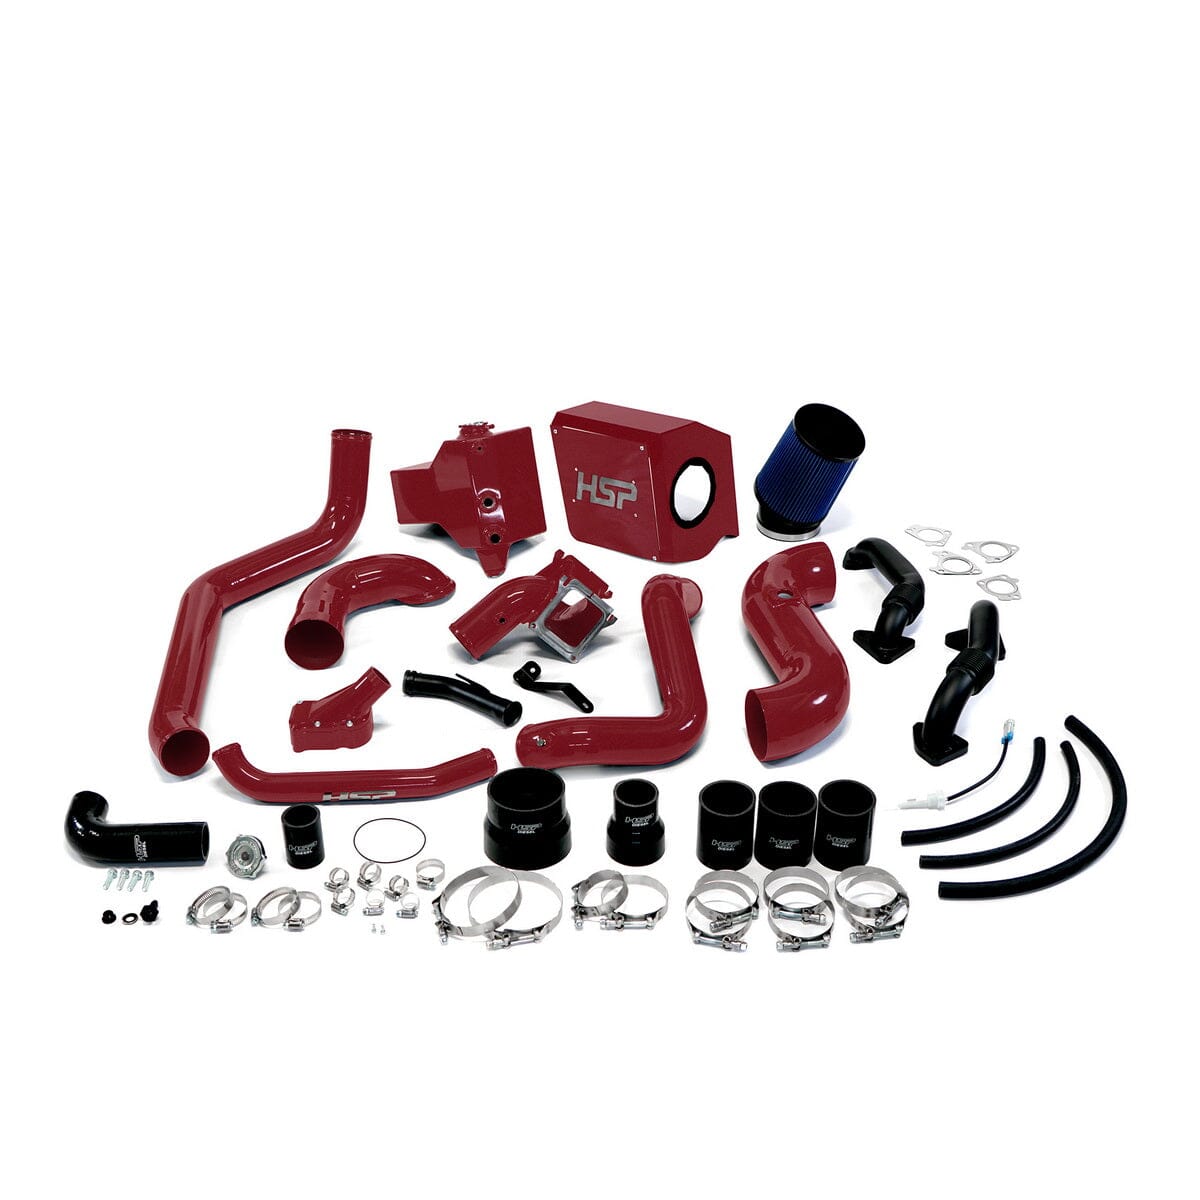 HSP Deluxe Max Air Flow Bundle (2006-2007 Chevrolet / GMC) Cold Air Intake HSP Diesel Candy Red 